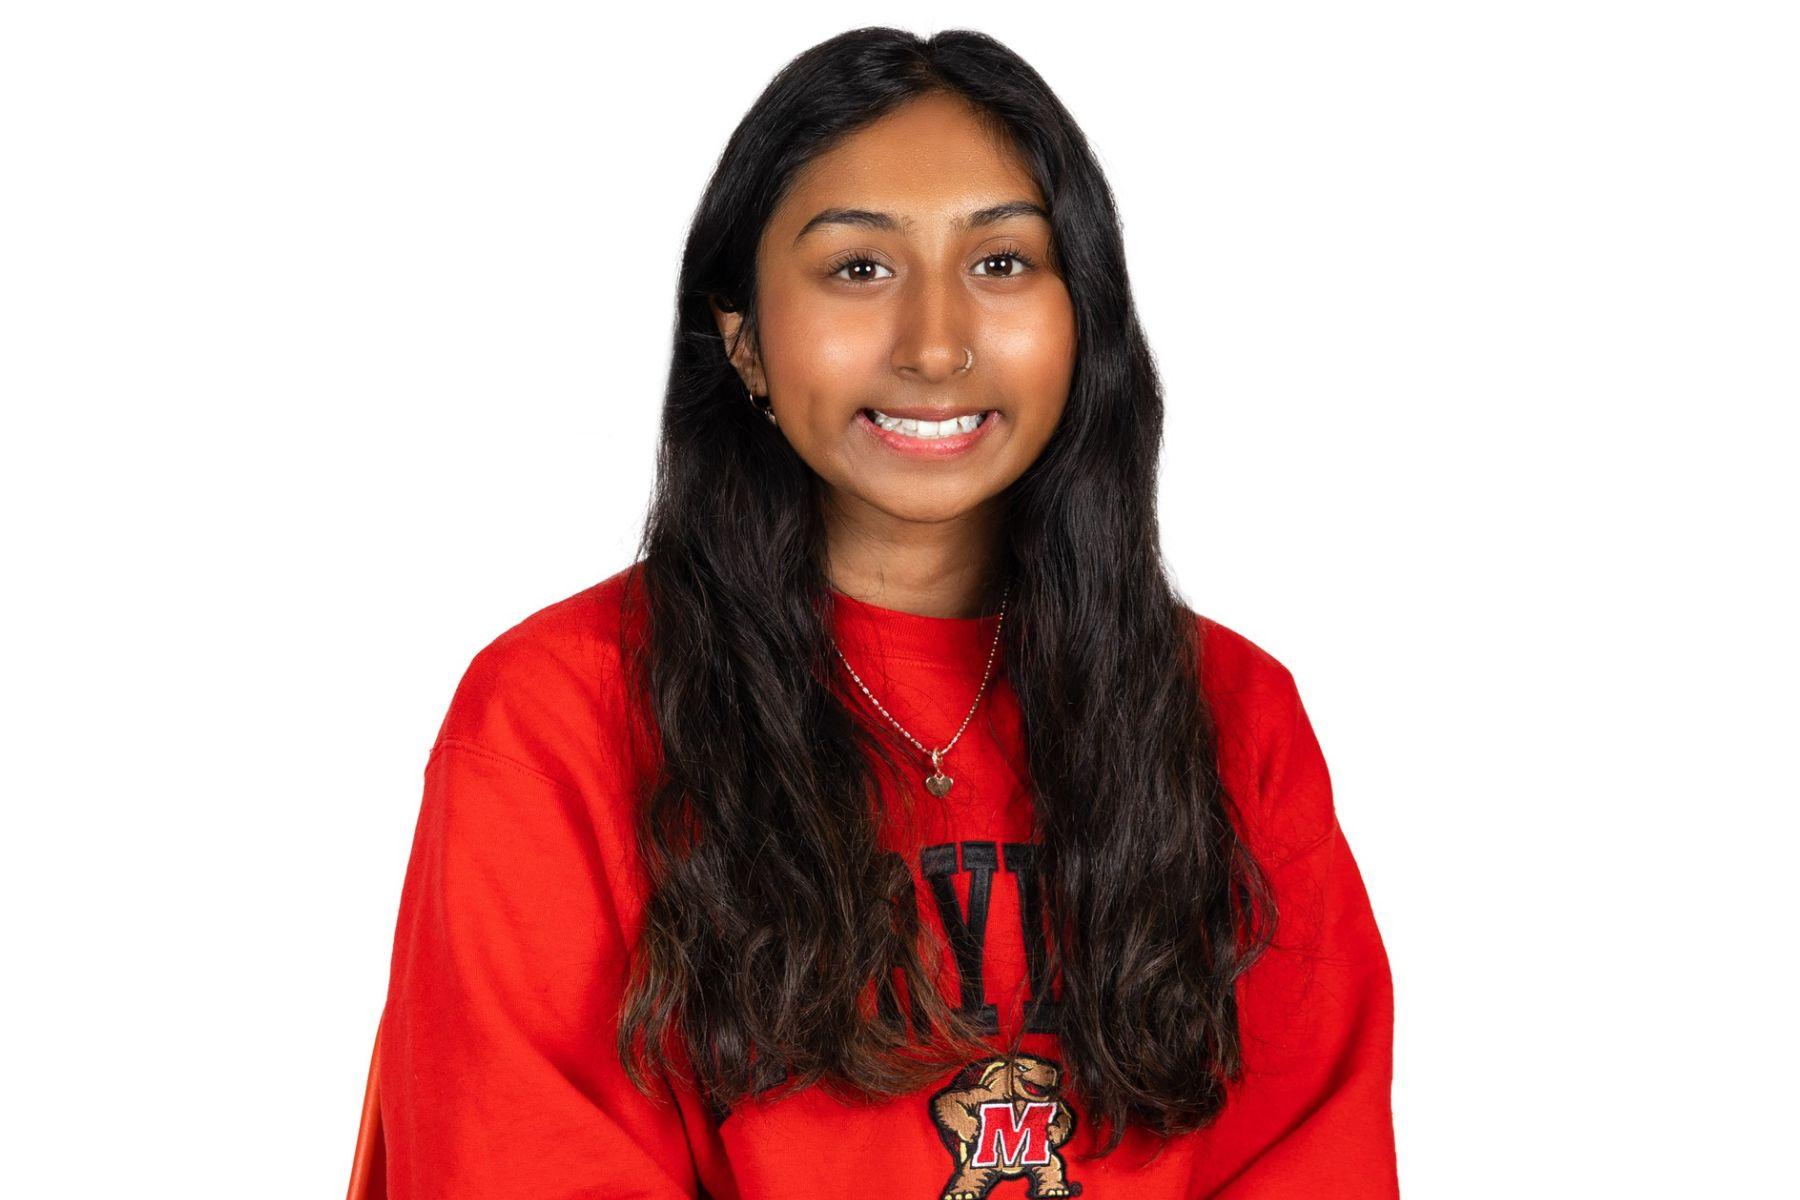 Saathvika is wearing a red Maryland sweatshirt and is smiling at the camera